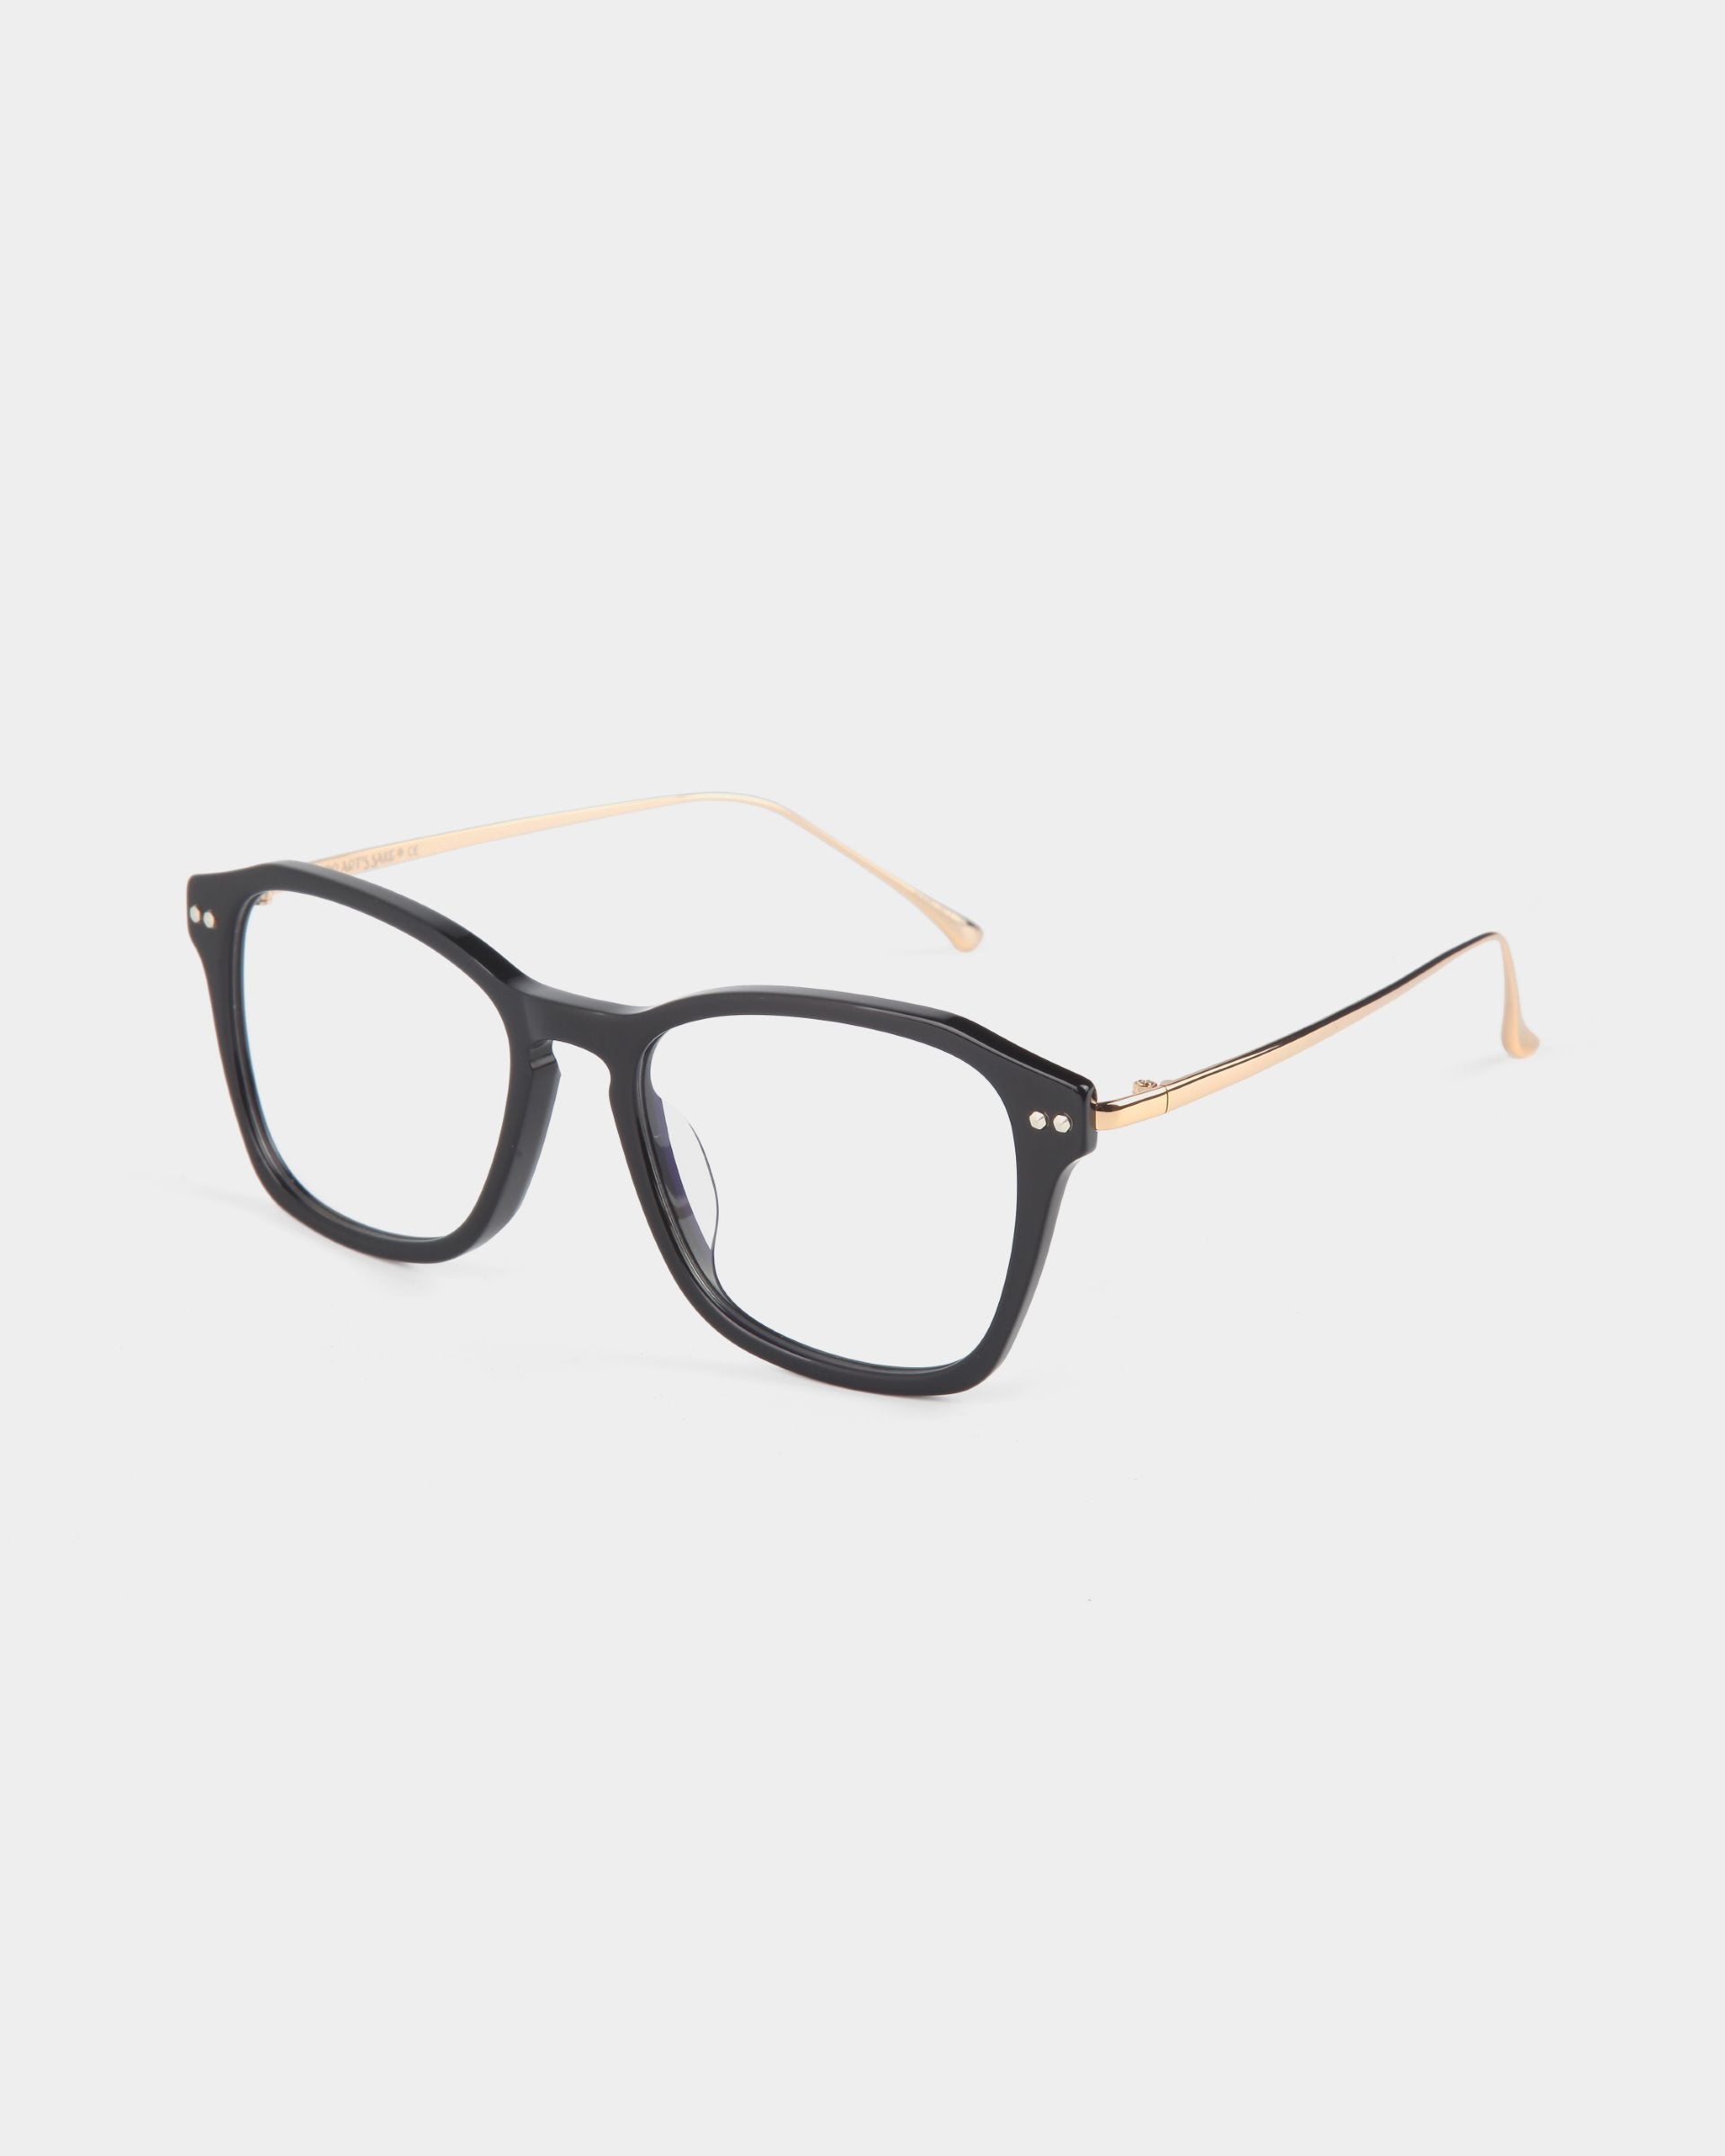 A pair of eyeglasses with matte black rectangular frames and thin metallic gold temples. The ends of the temples are rounded for added comfort. Made with stainless steel frames, these glasses also feature a blue light filter. Displayed on a clean white background, this is the Morris by For Art's Sake®.